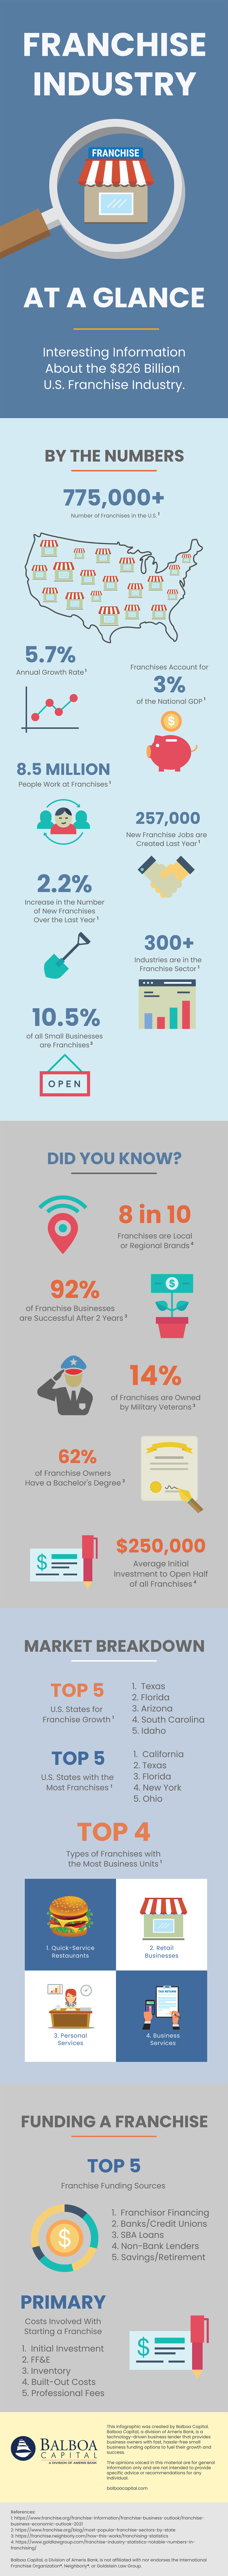 U.S. Franchise Industry Infographic